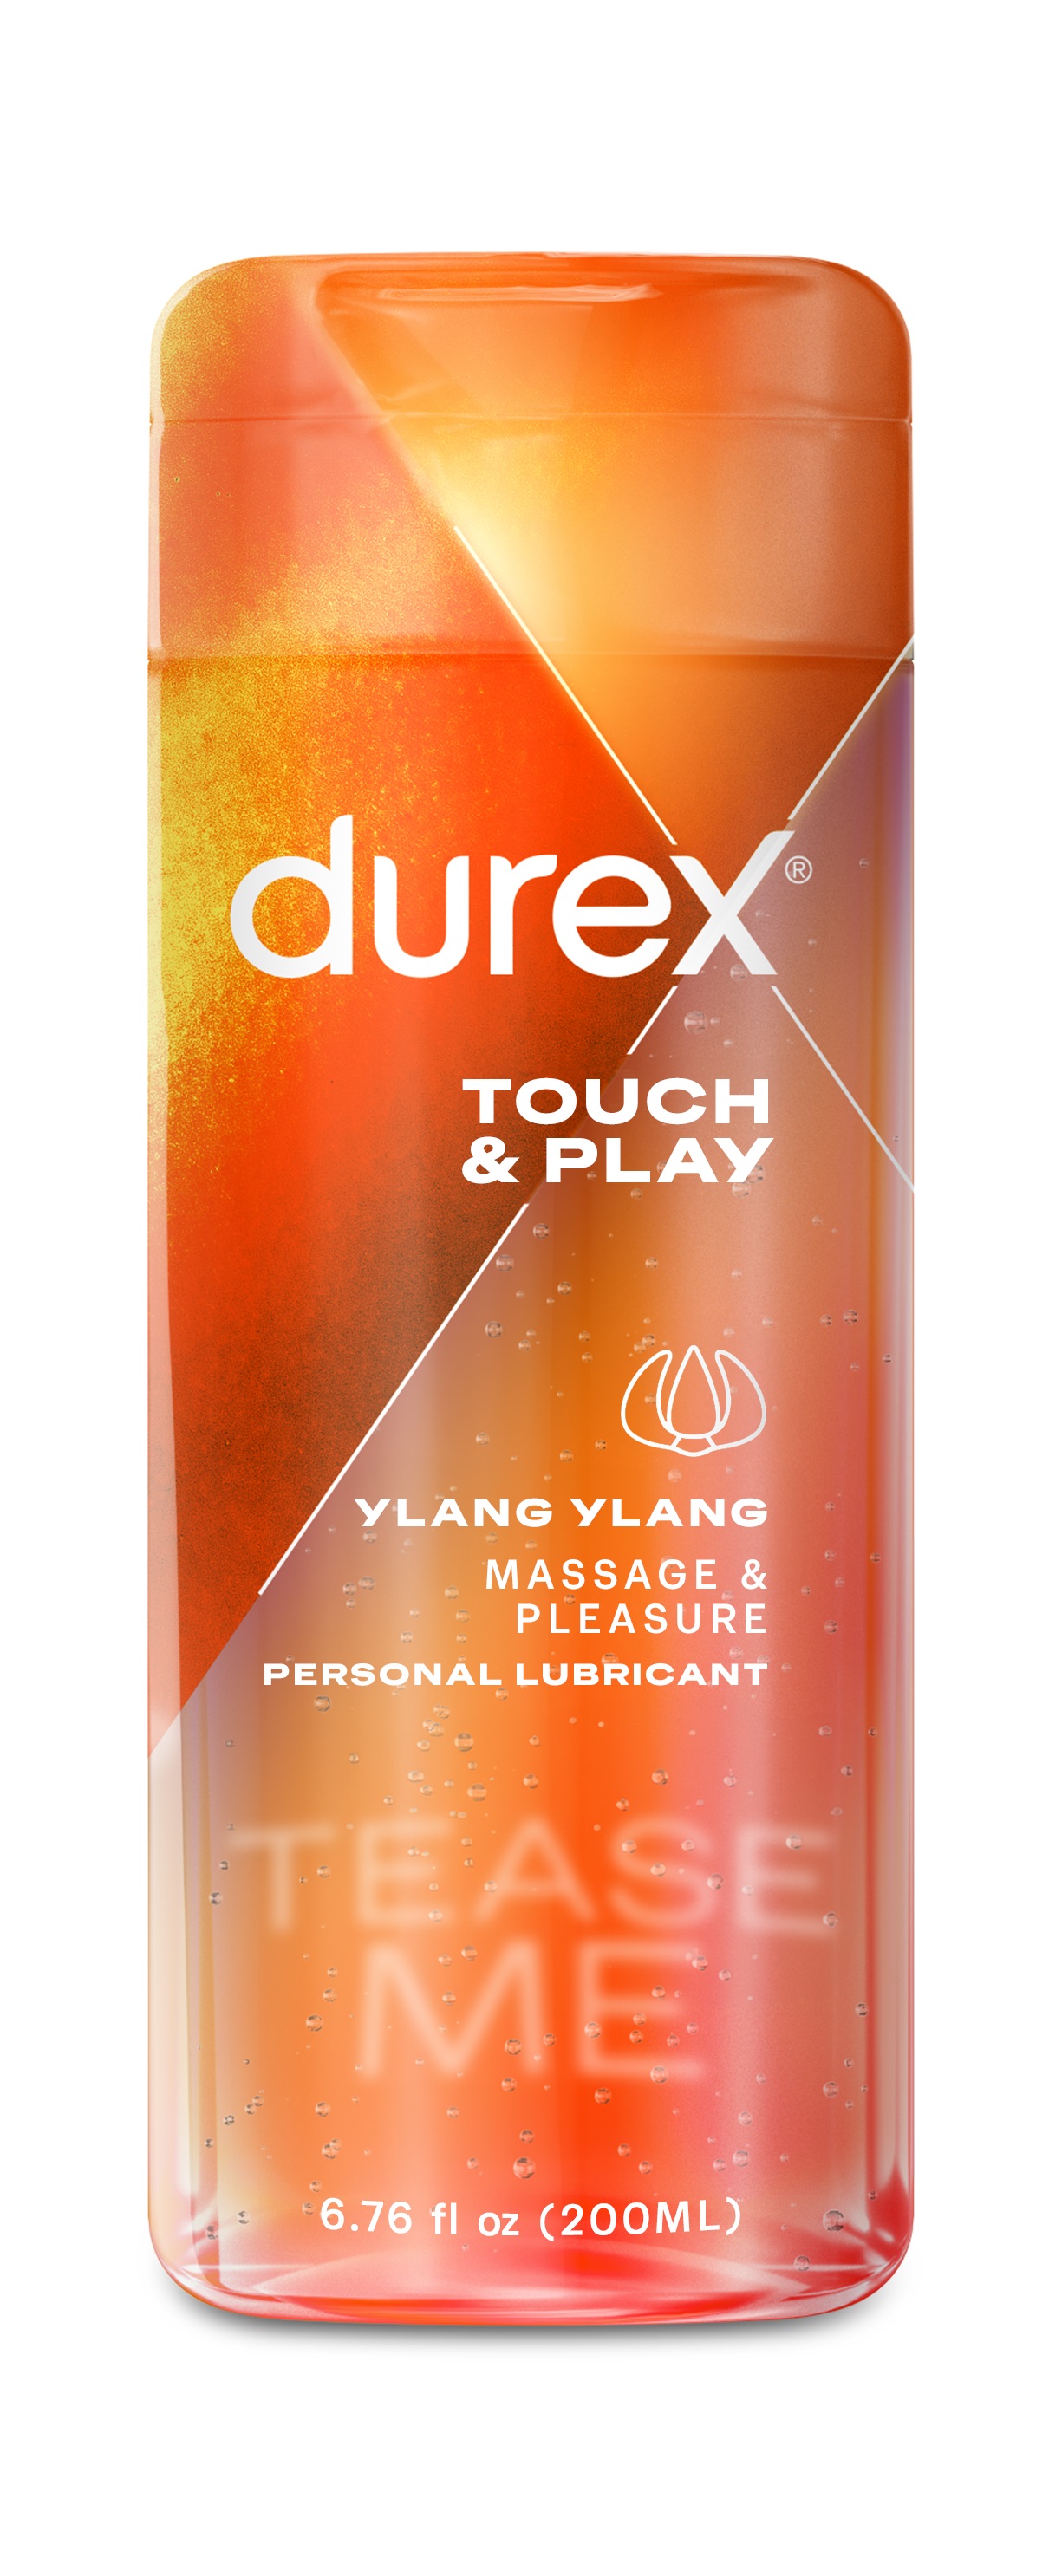 Durex Touch  Play Ylang Ylang Personal Lubricant